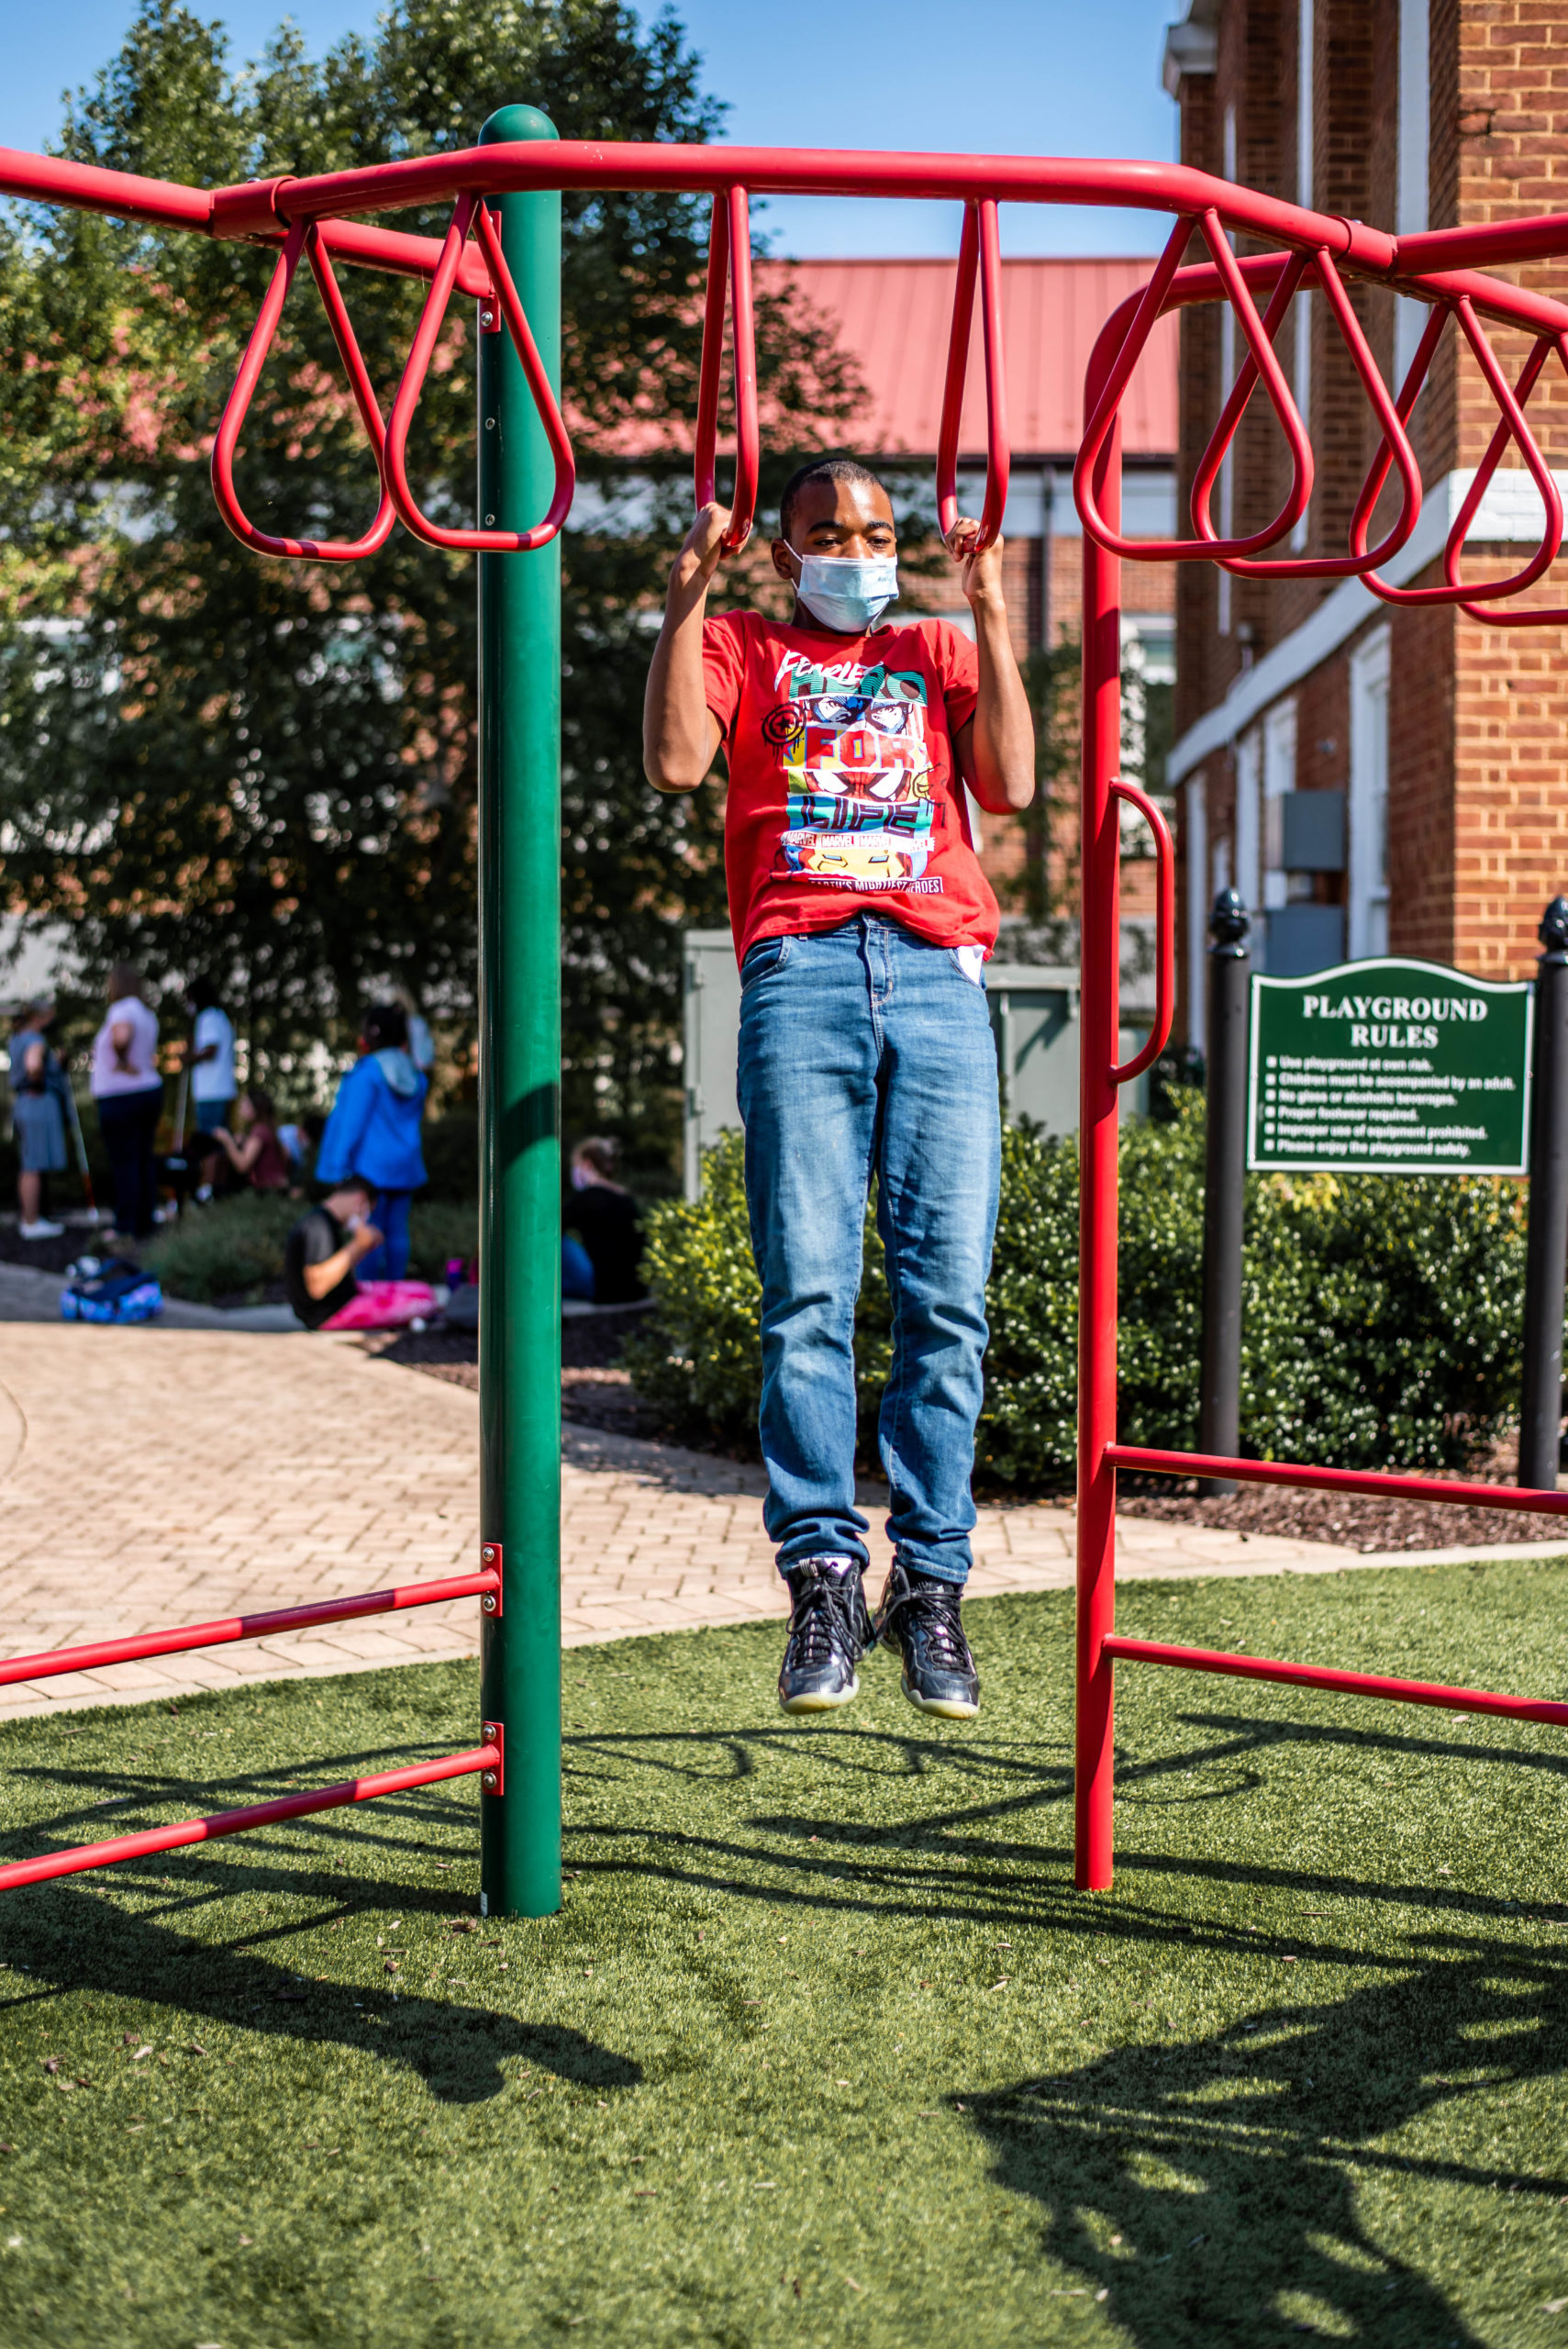 A student playing on playground equipment